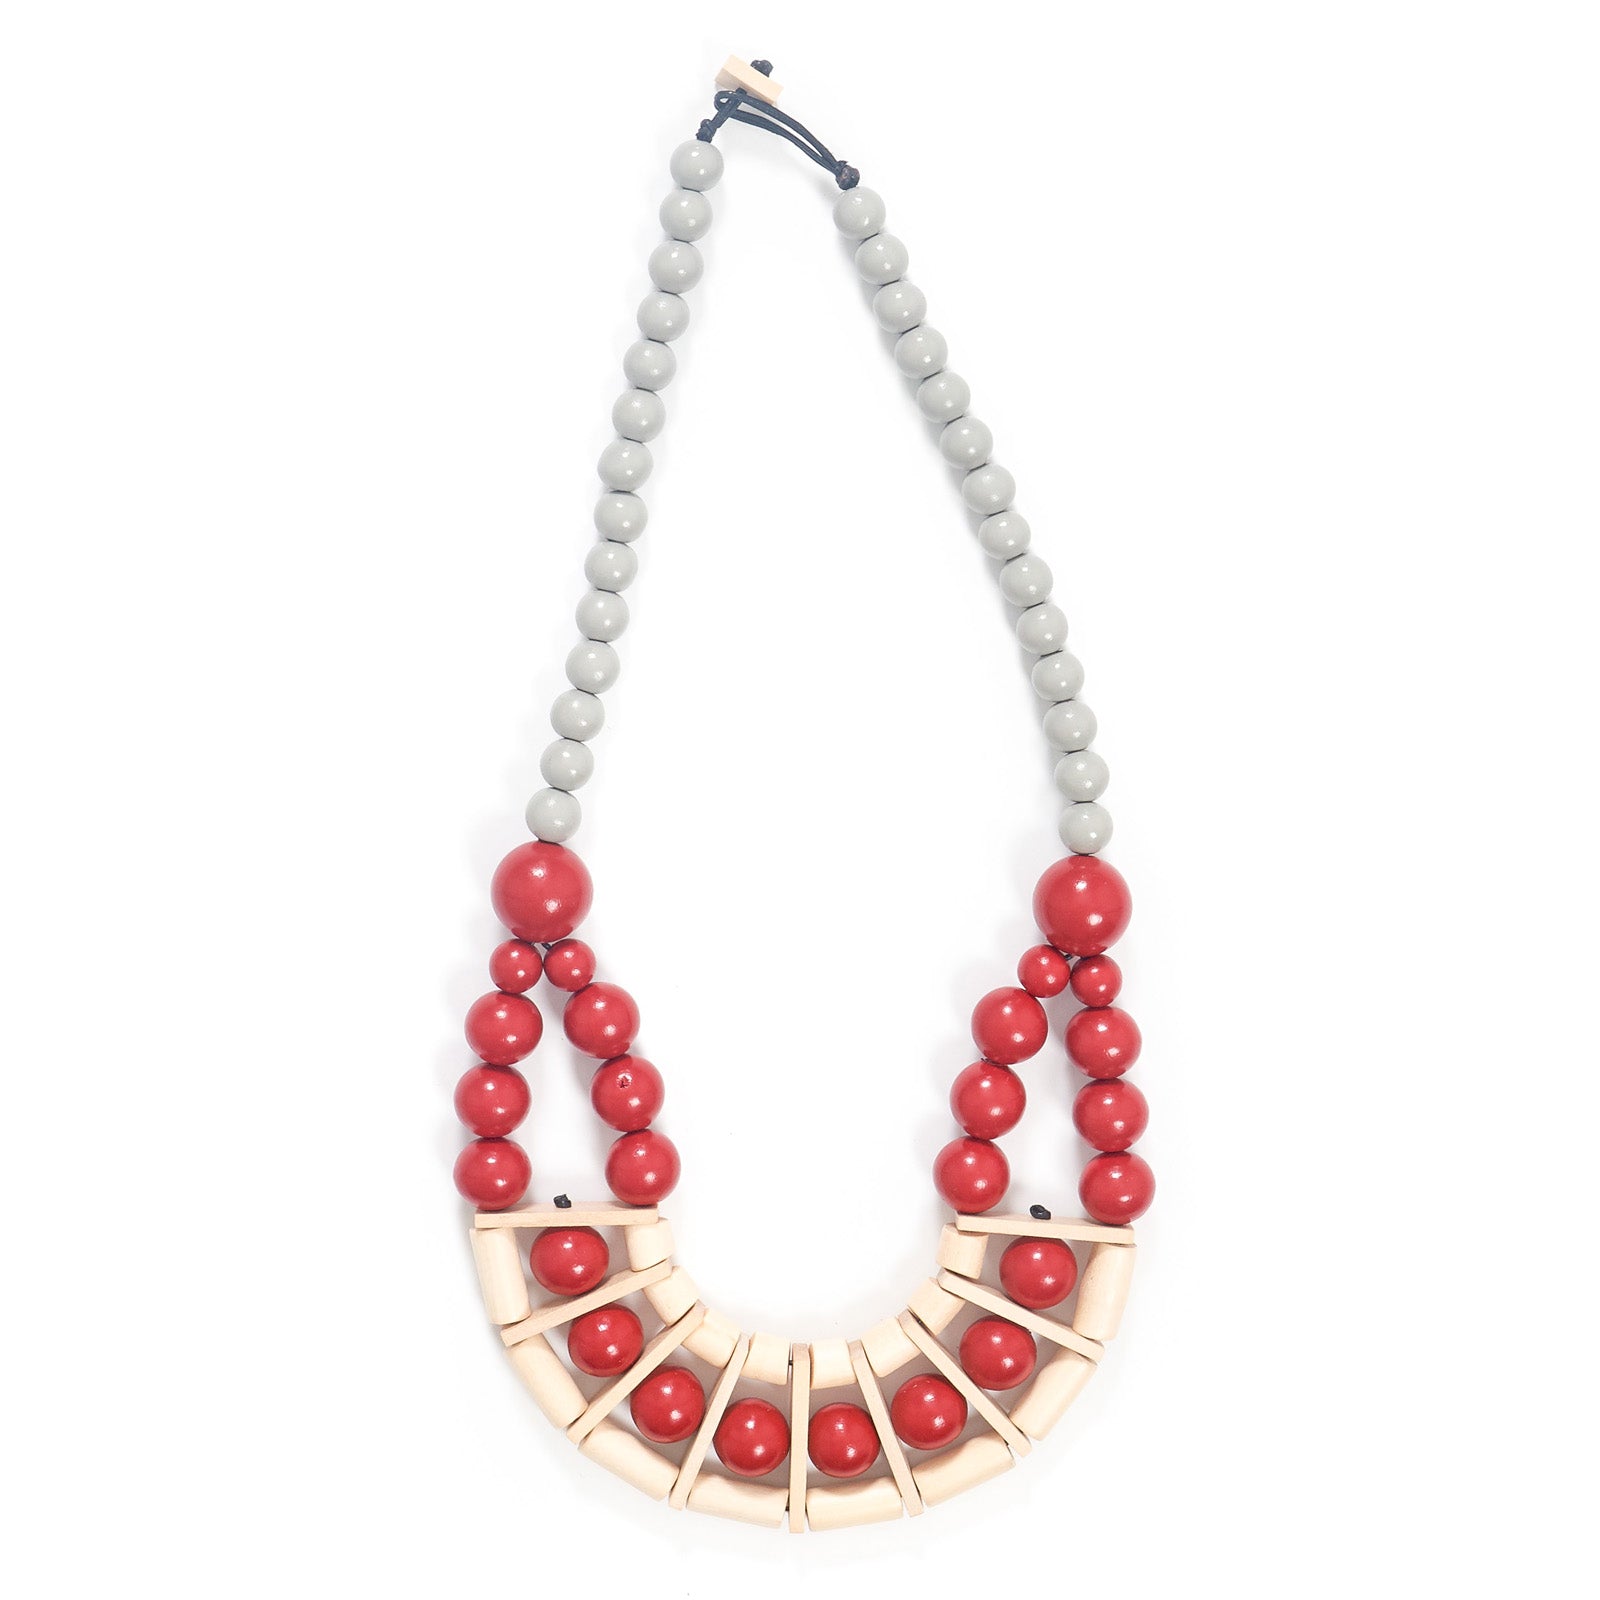 Compartmental necklace